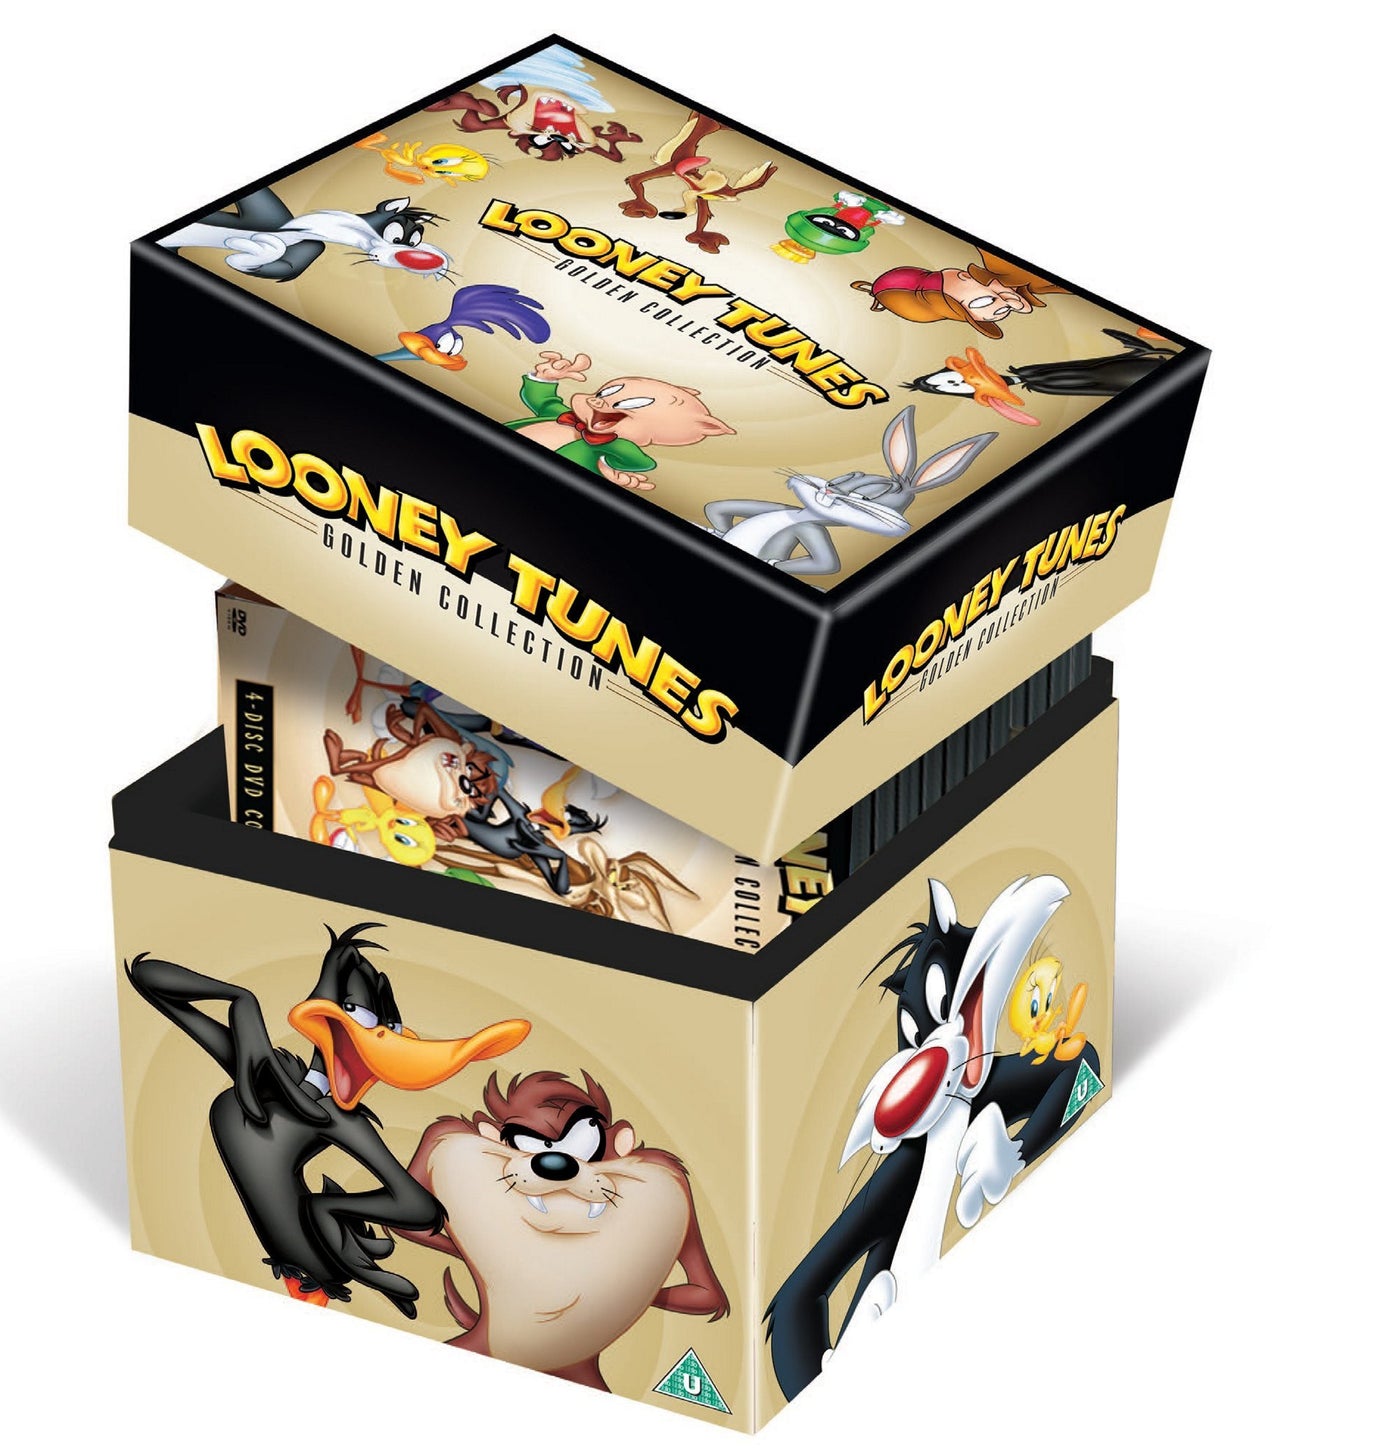 Looney Tunes - The Complete Golden Collection (DVD)